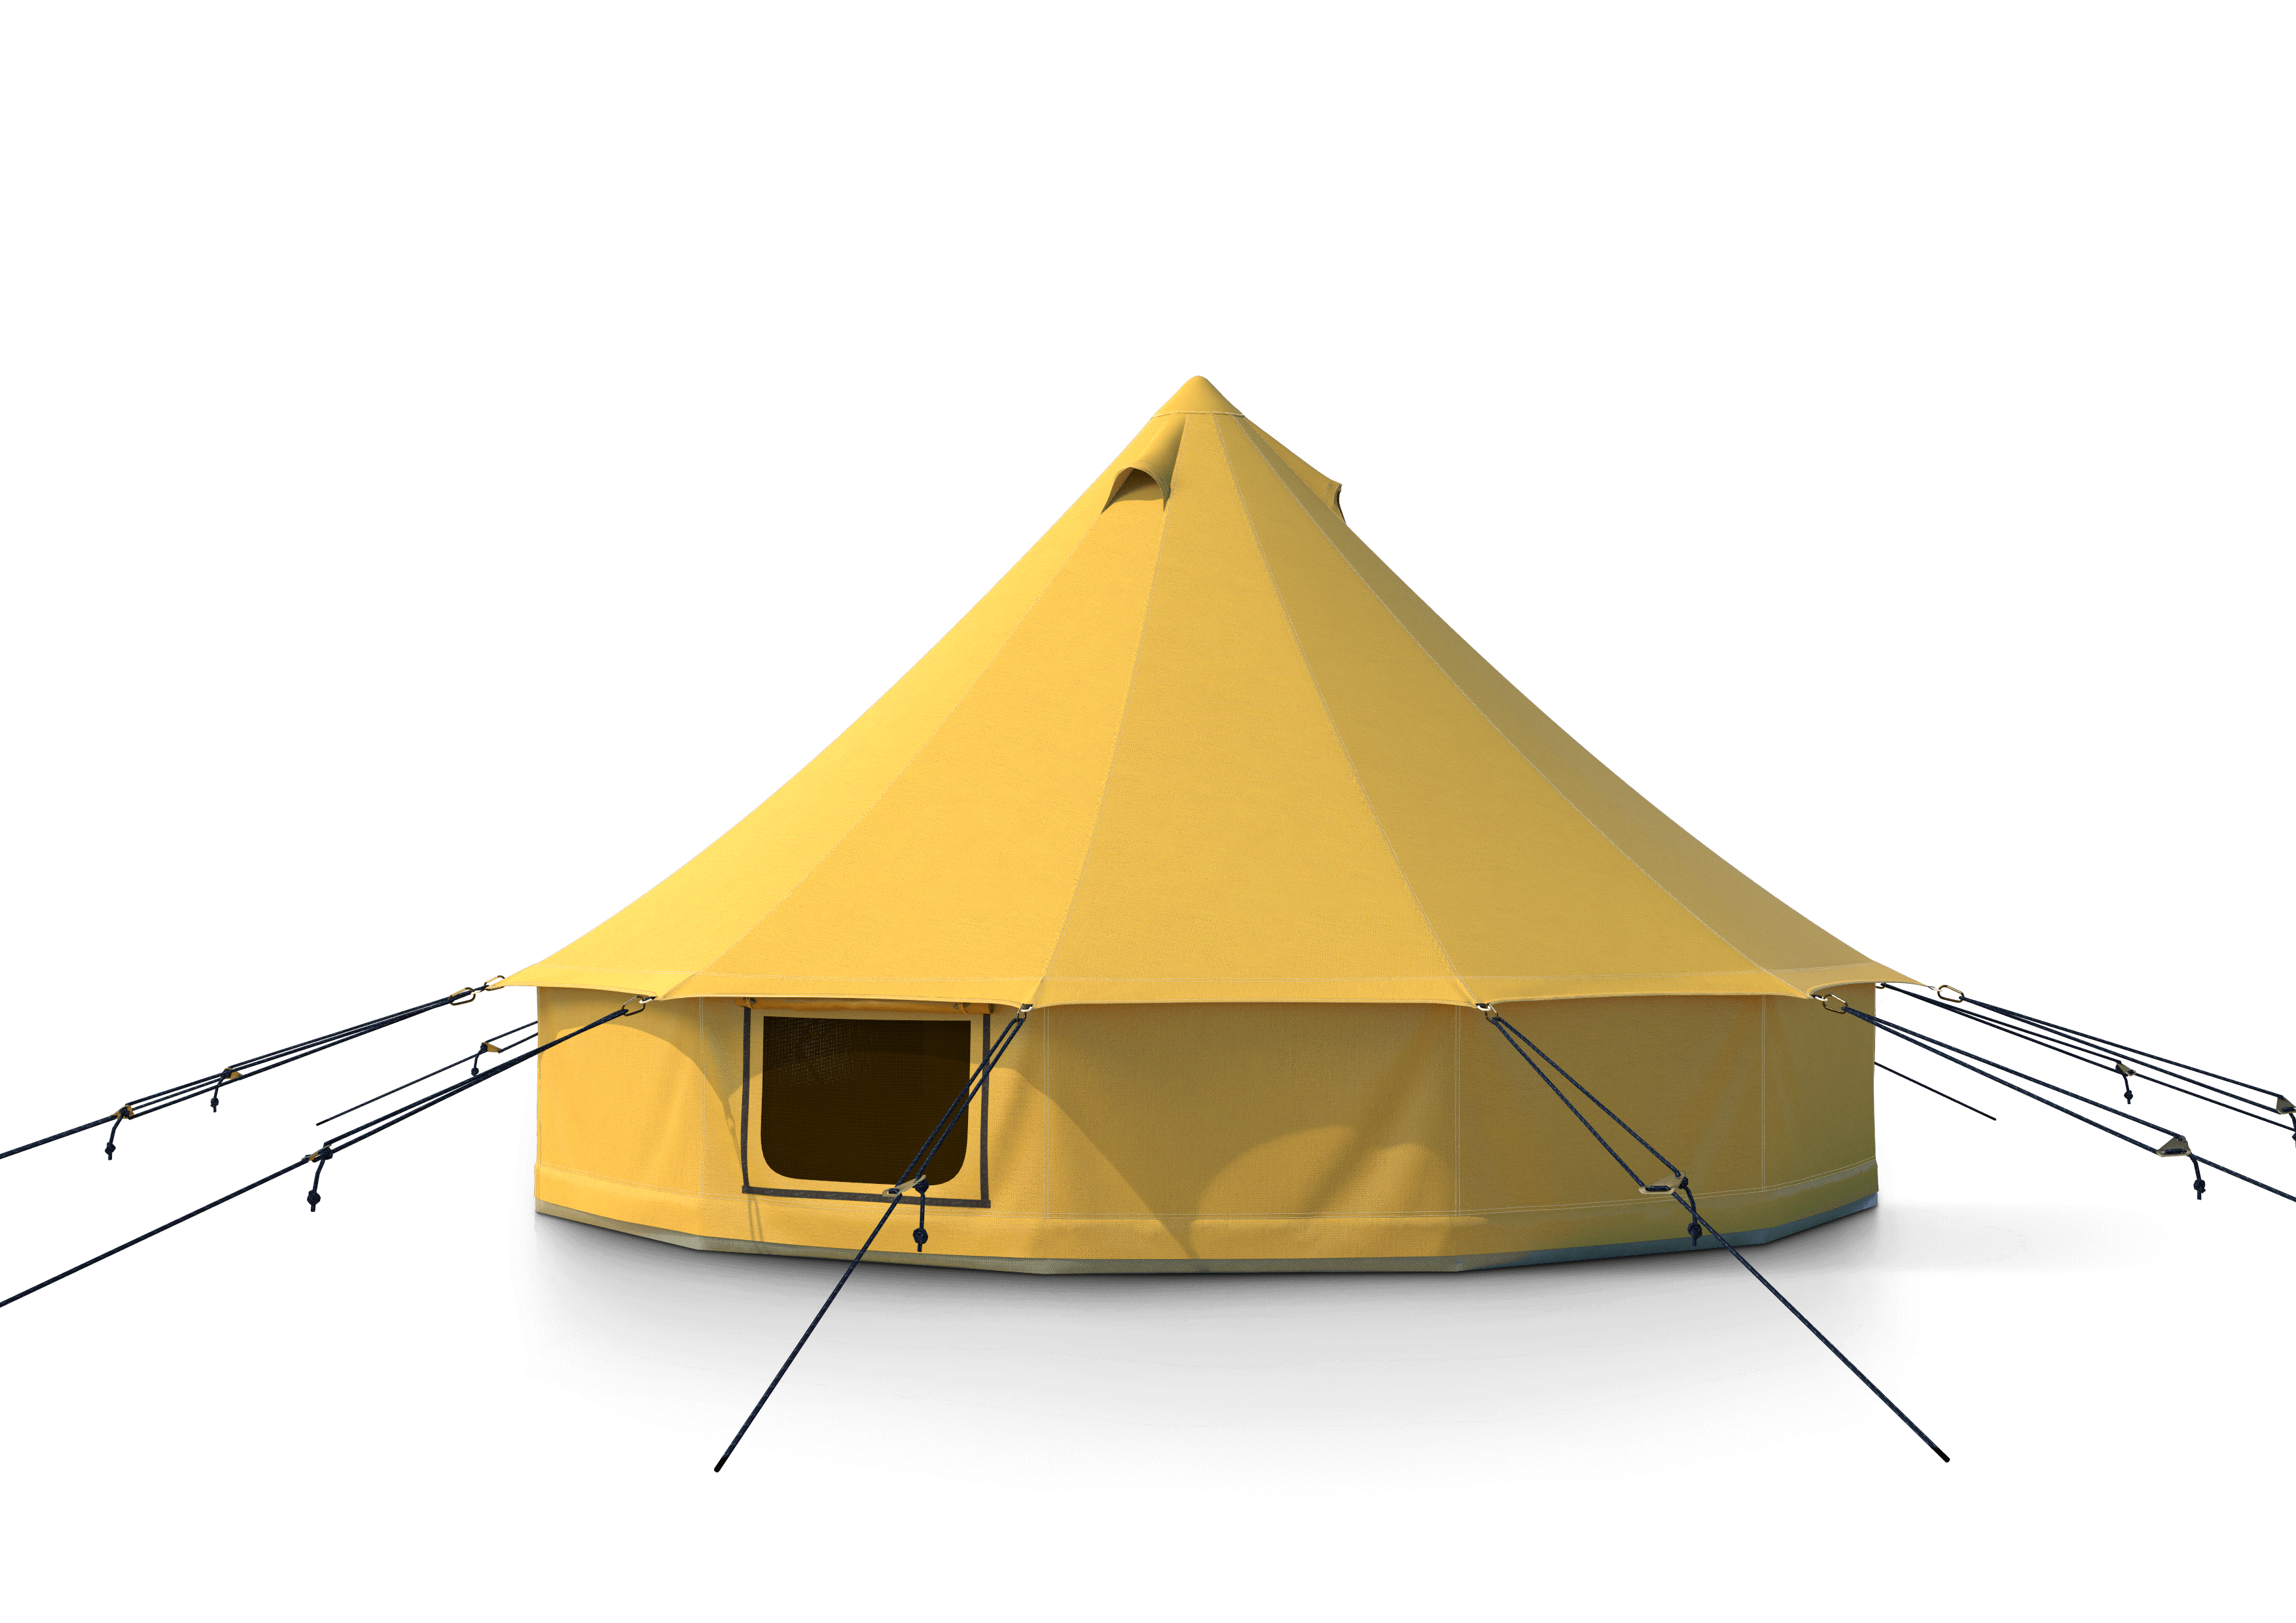 Beyond tents bell tent glamping camping canvas tent sibley tent autentic tents